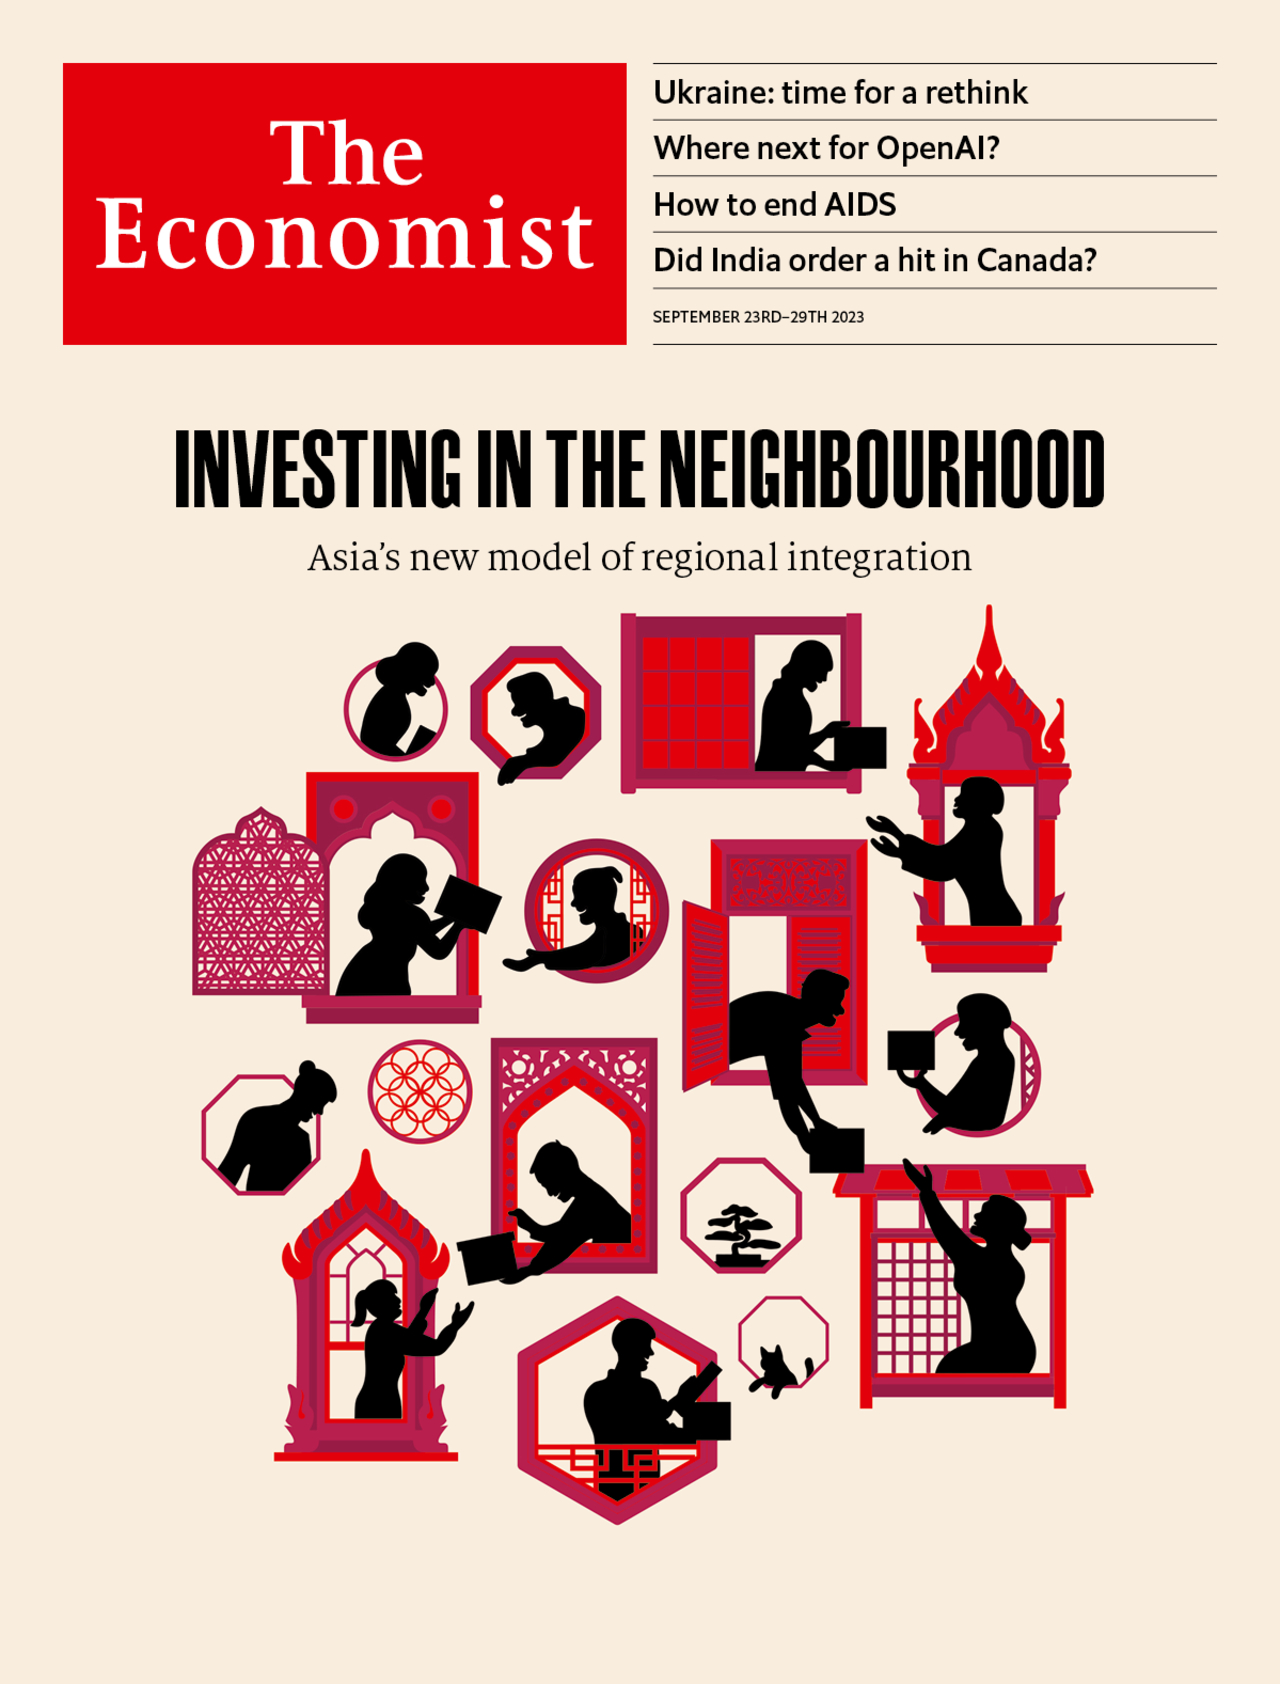 Investing in the neighbourhood: Asia’s new model of regional integration